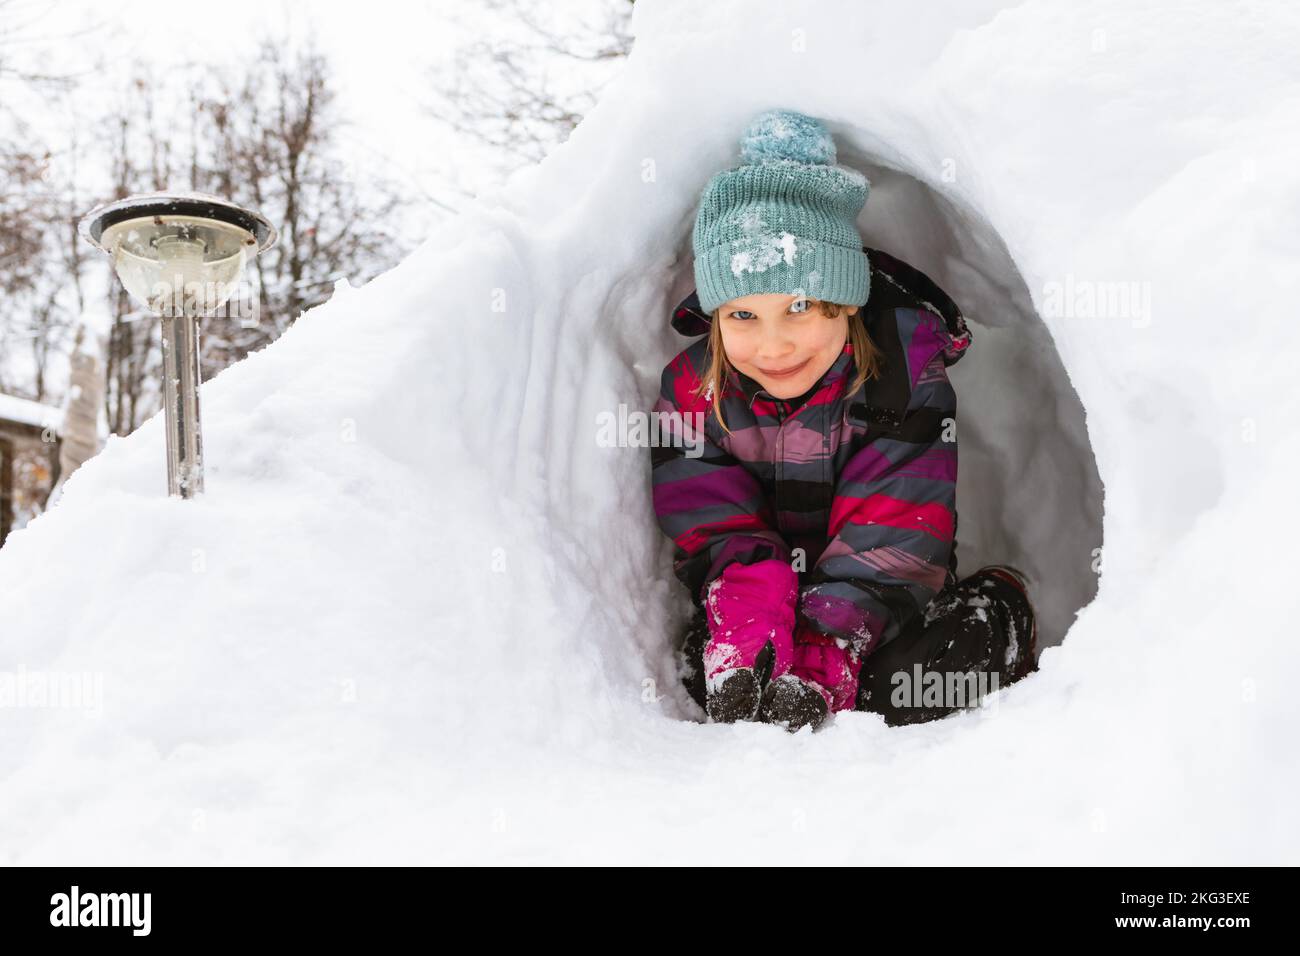 Happy little girl sitting in a snow cave made in a snowdrift looking at camera smiling Stock Photo